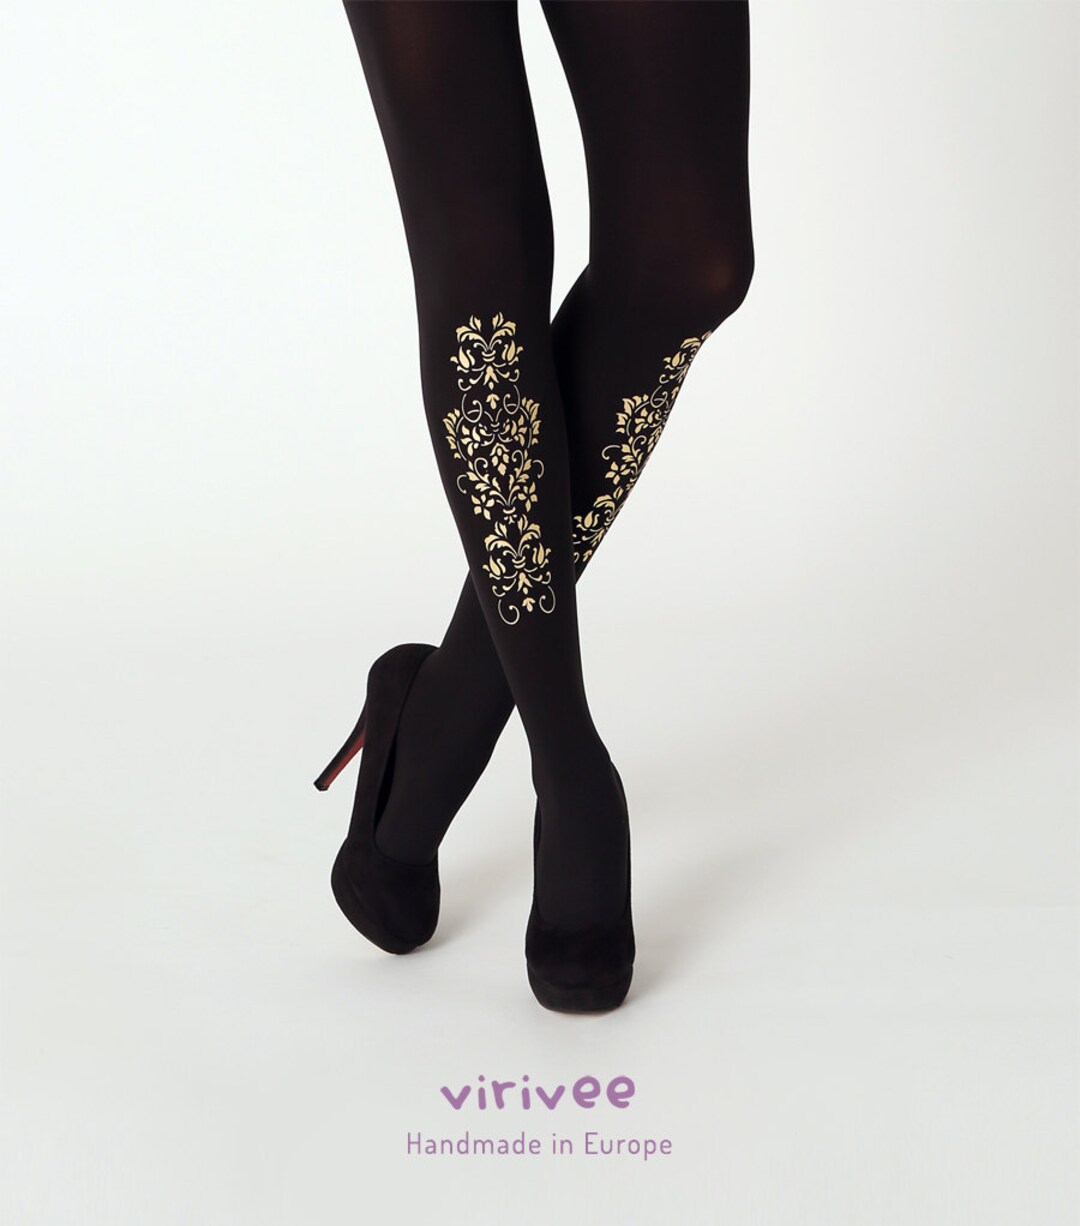 Plus SIZE Star Tights With Silver or Gold Pattern, S-4XL Sizes, Chrismas  Outfit, Burlesque Halloween Costume -  Canada